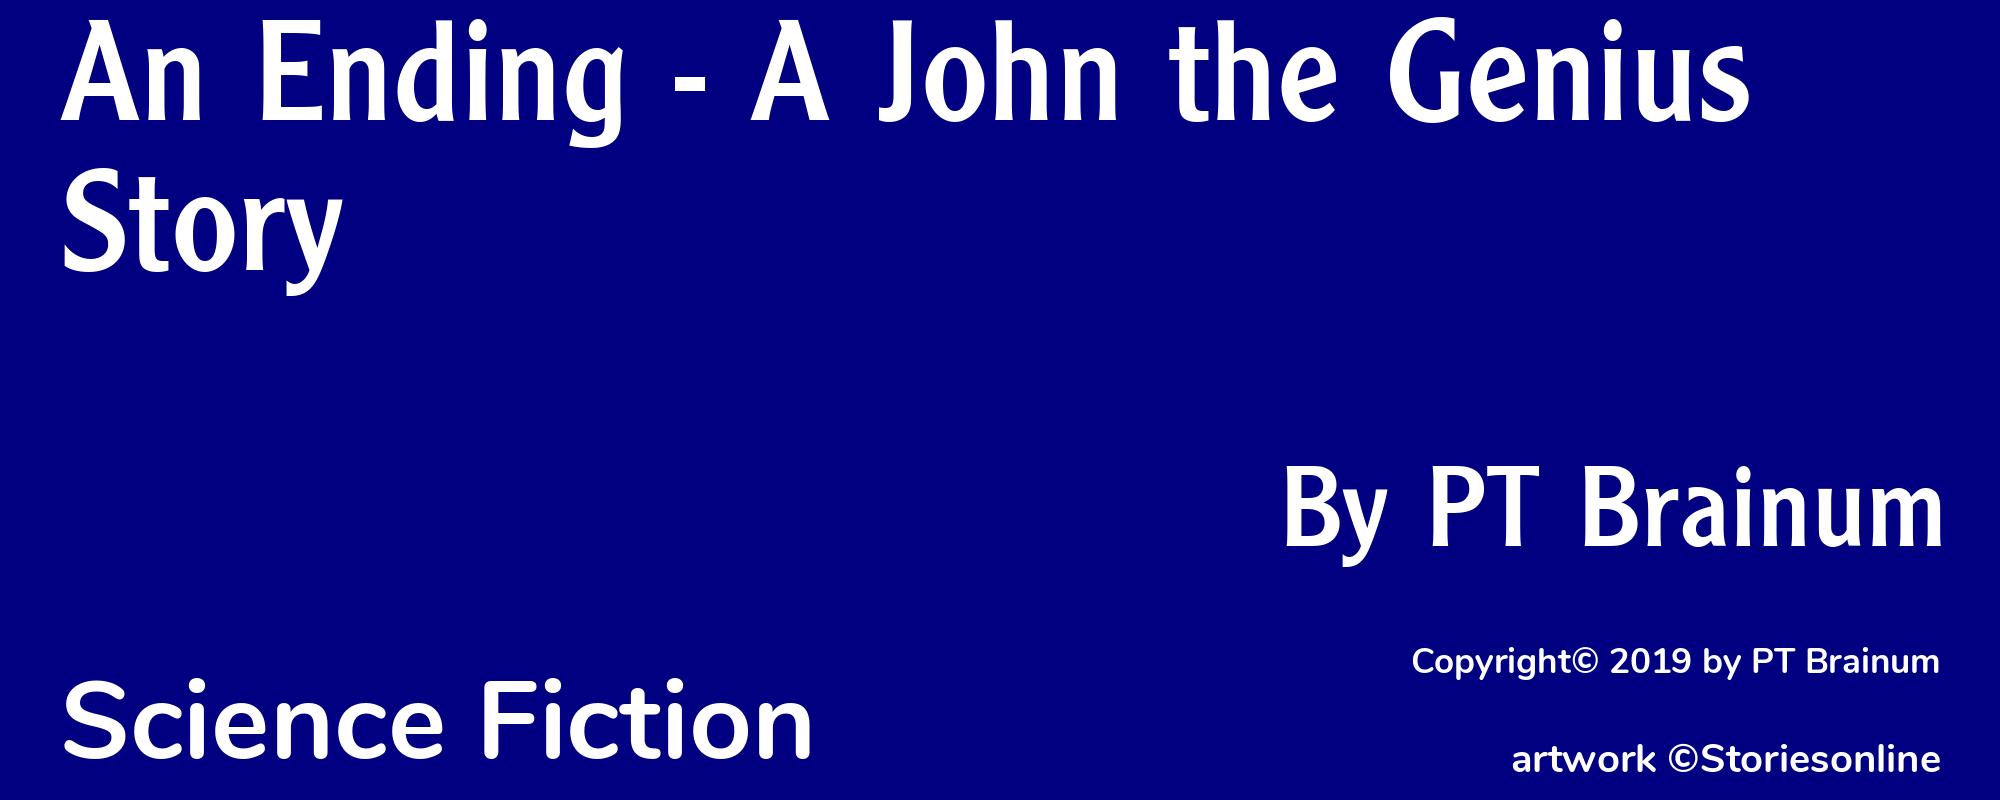 An Ending - A John the Genius Story - Cover